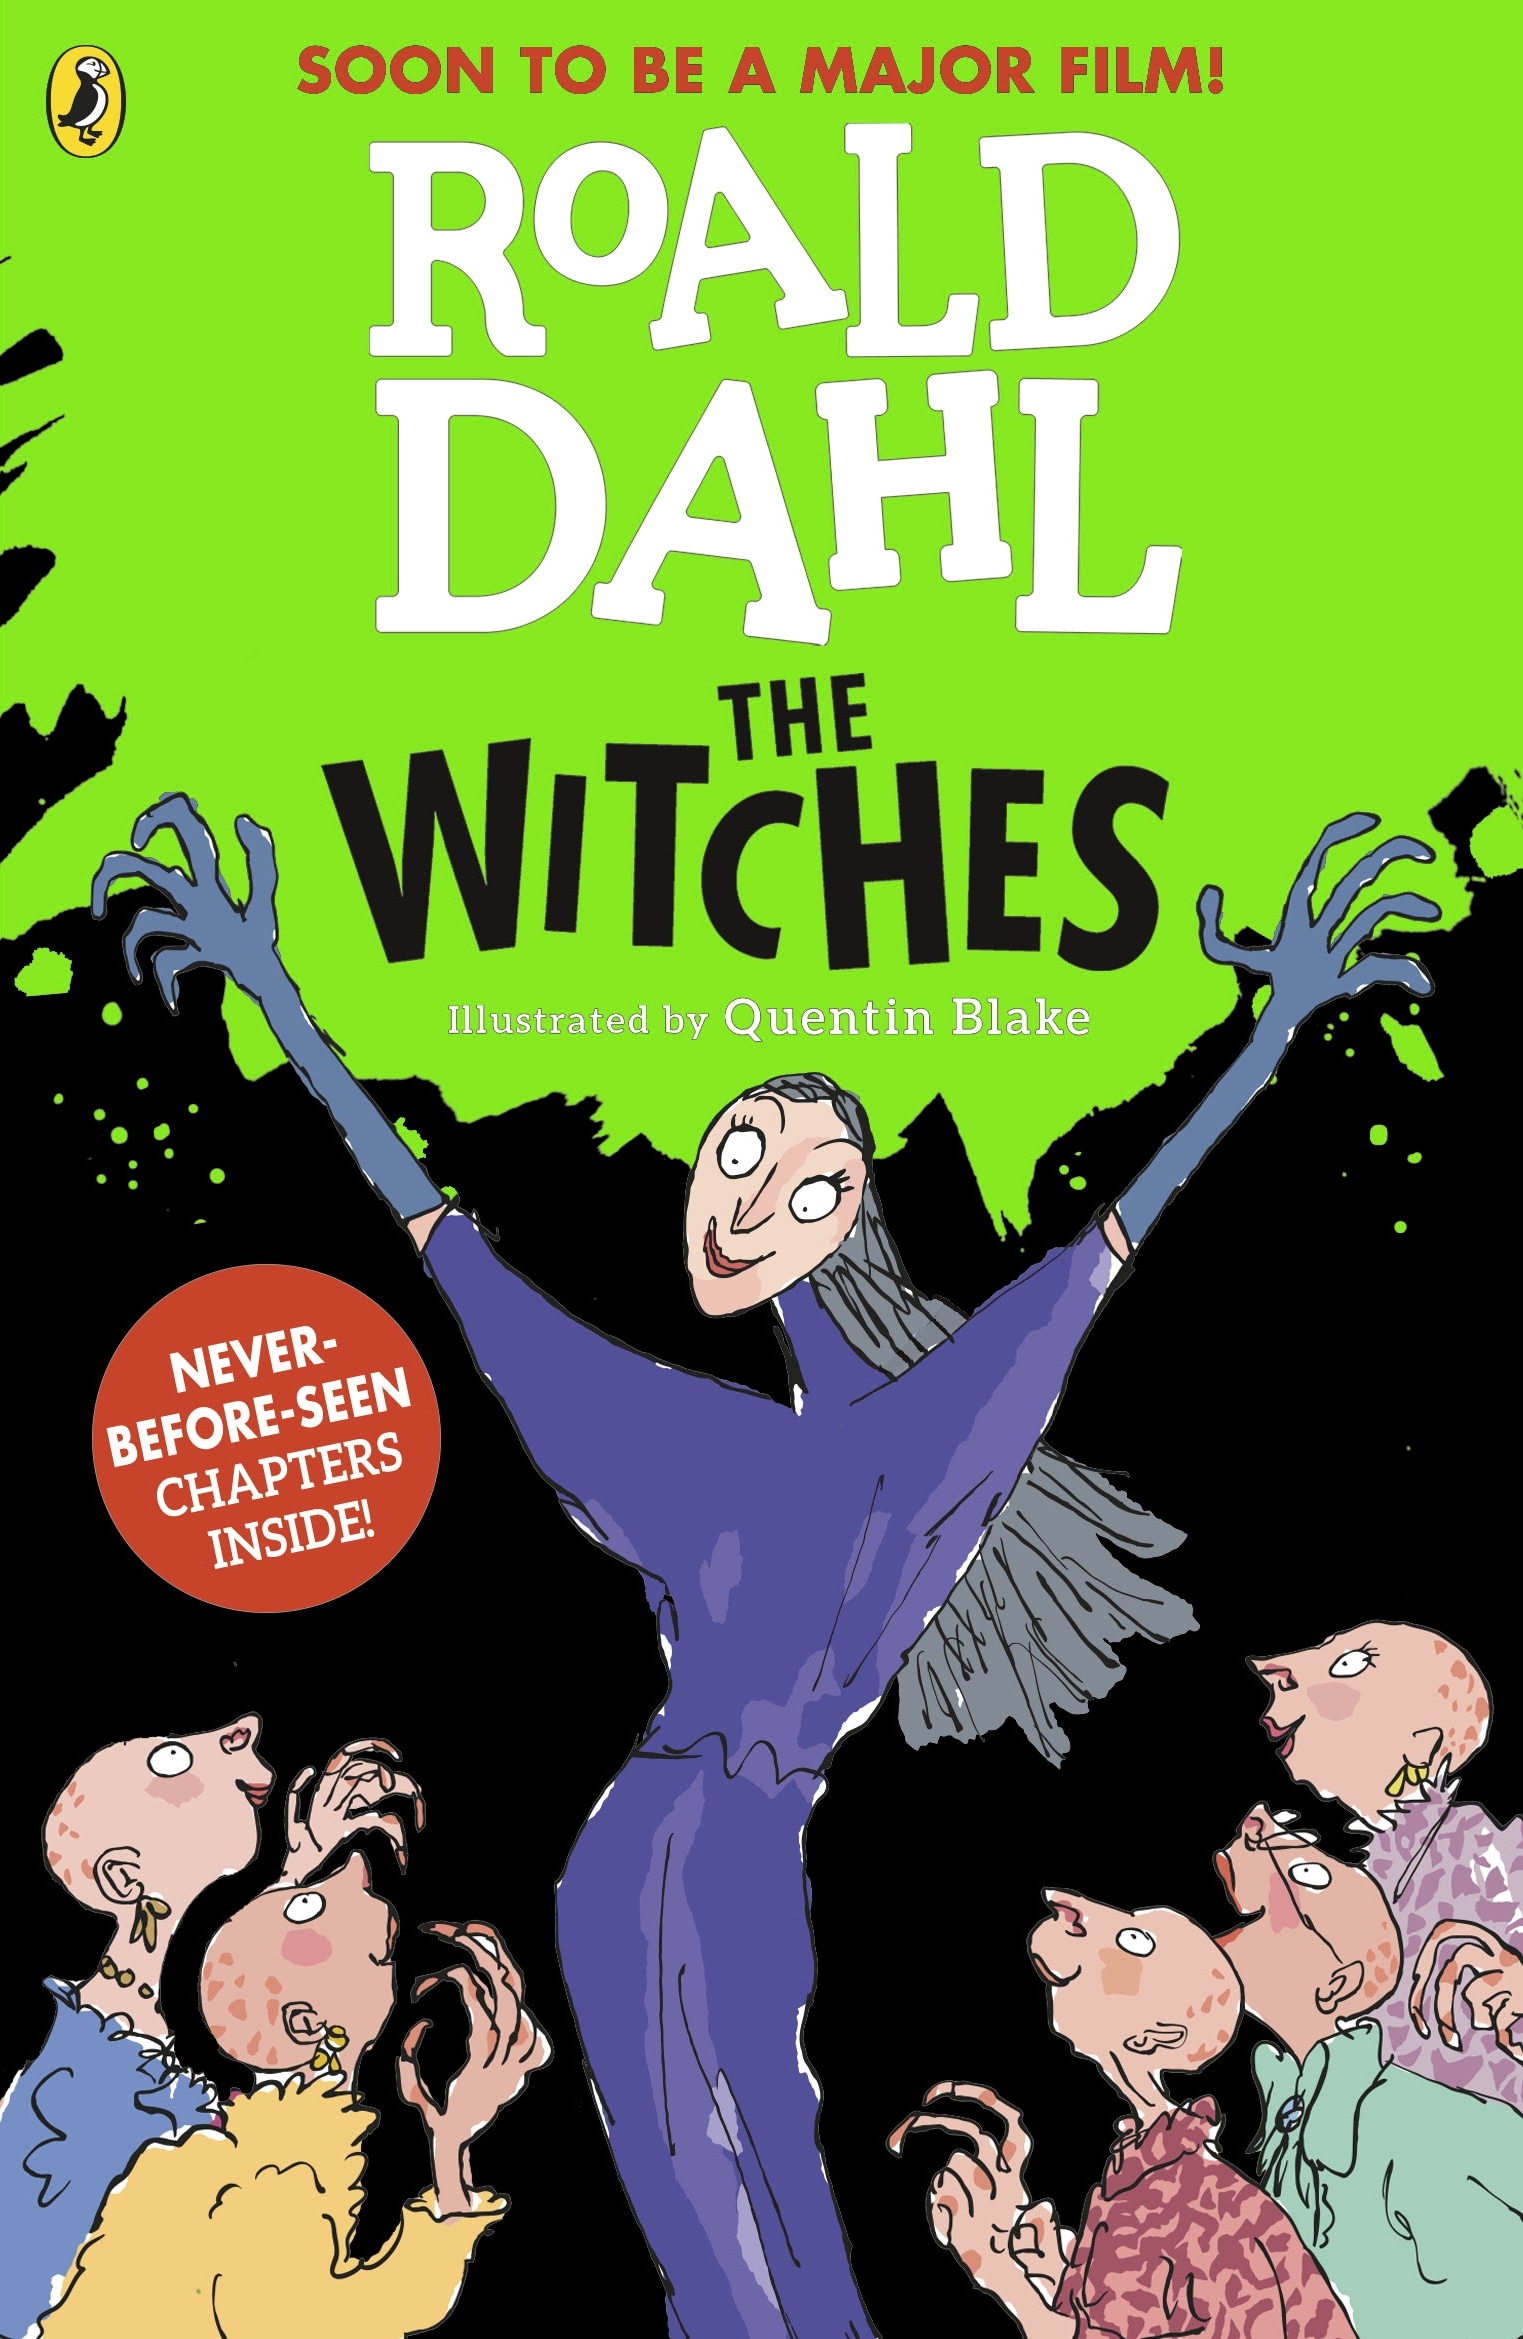 Book “The Witches” by Roald Dahl — February 11, 2016